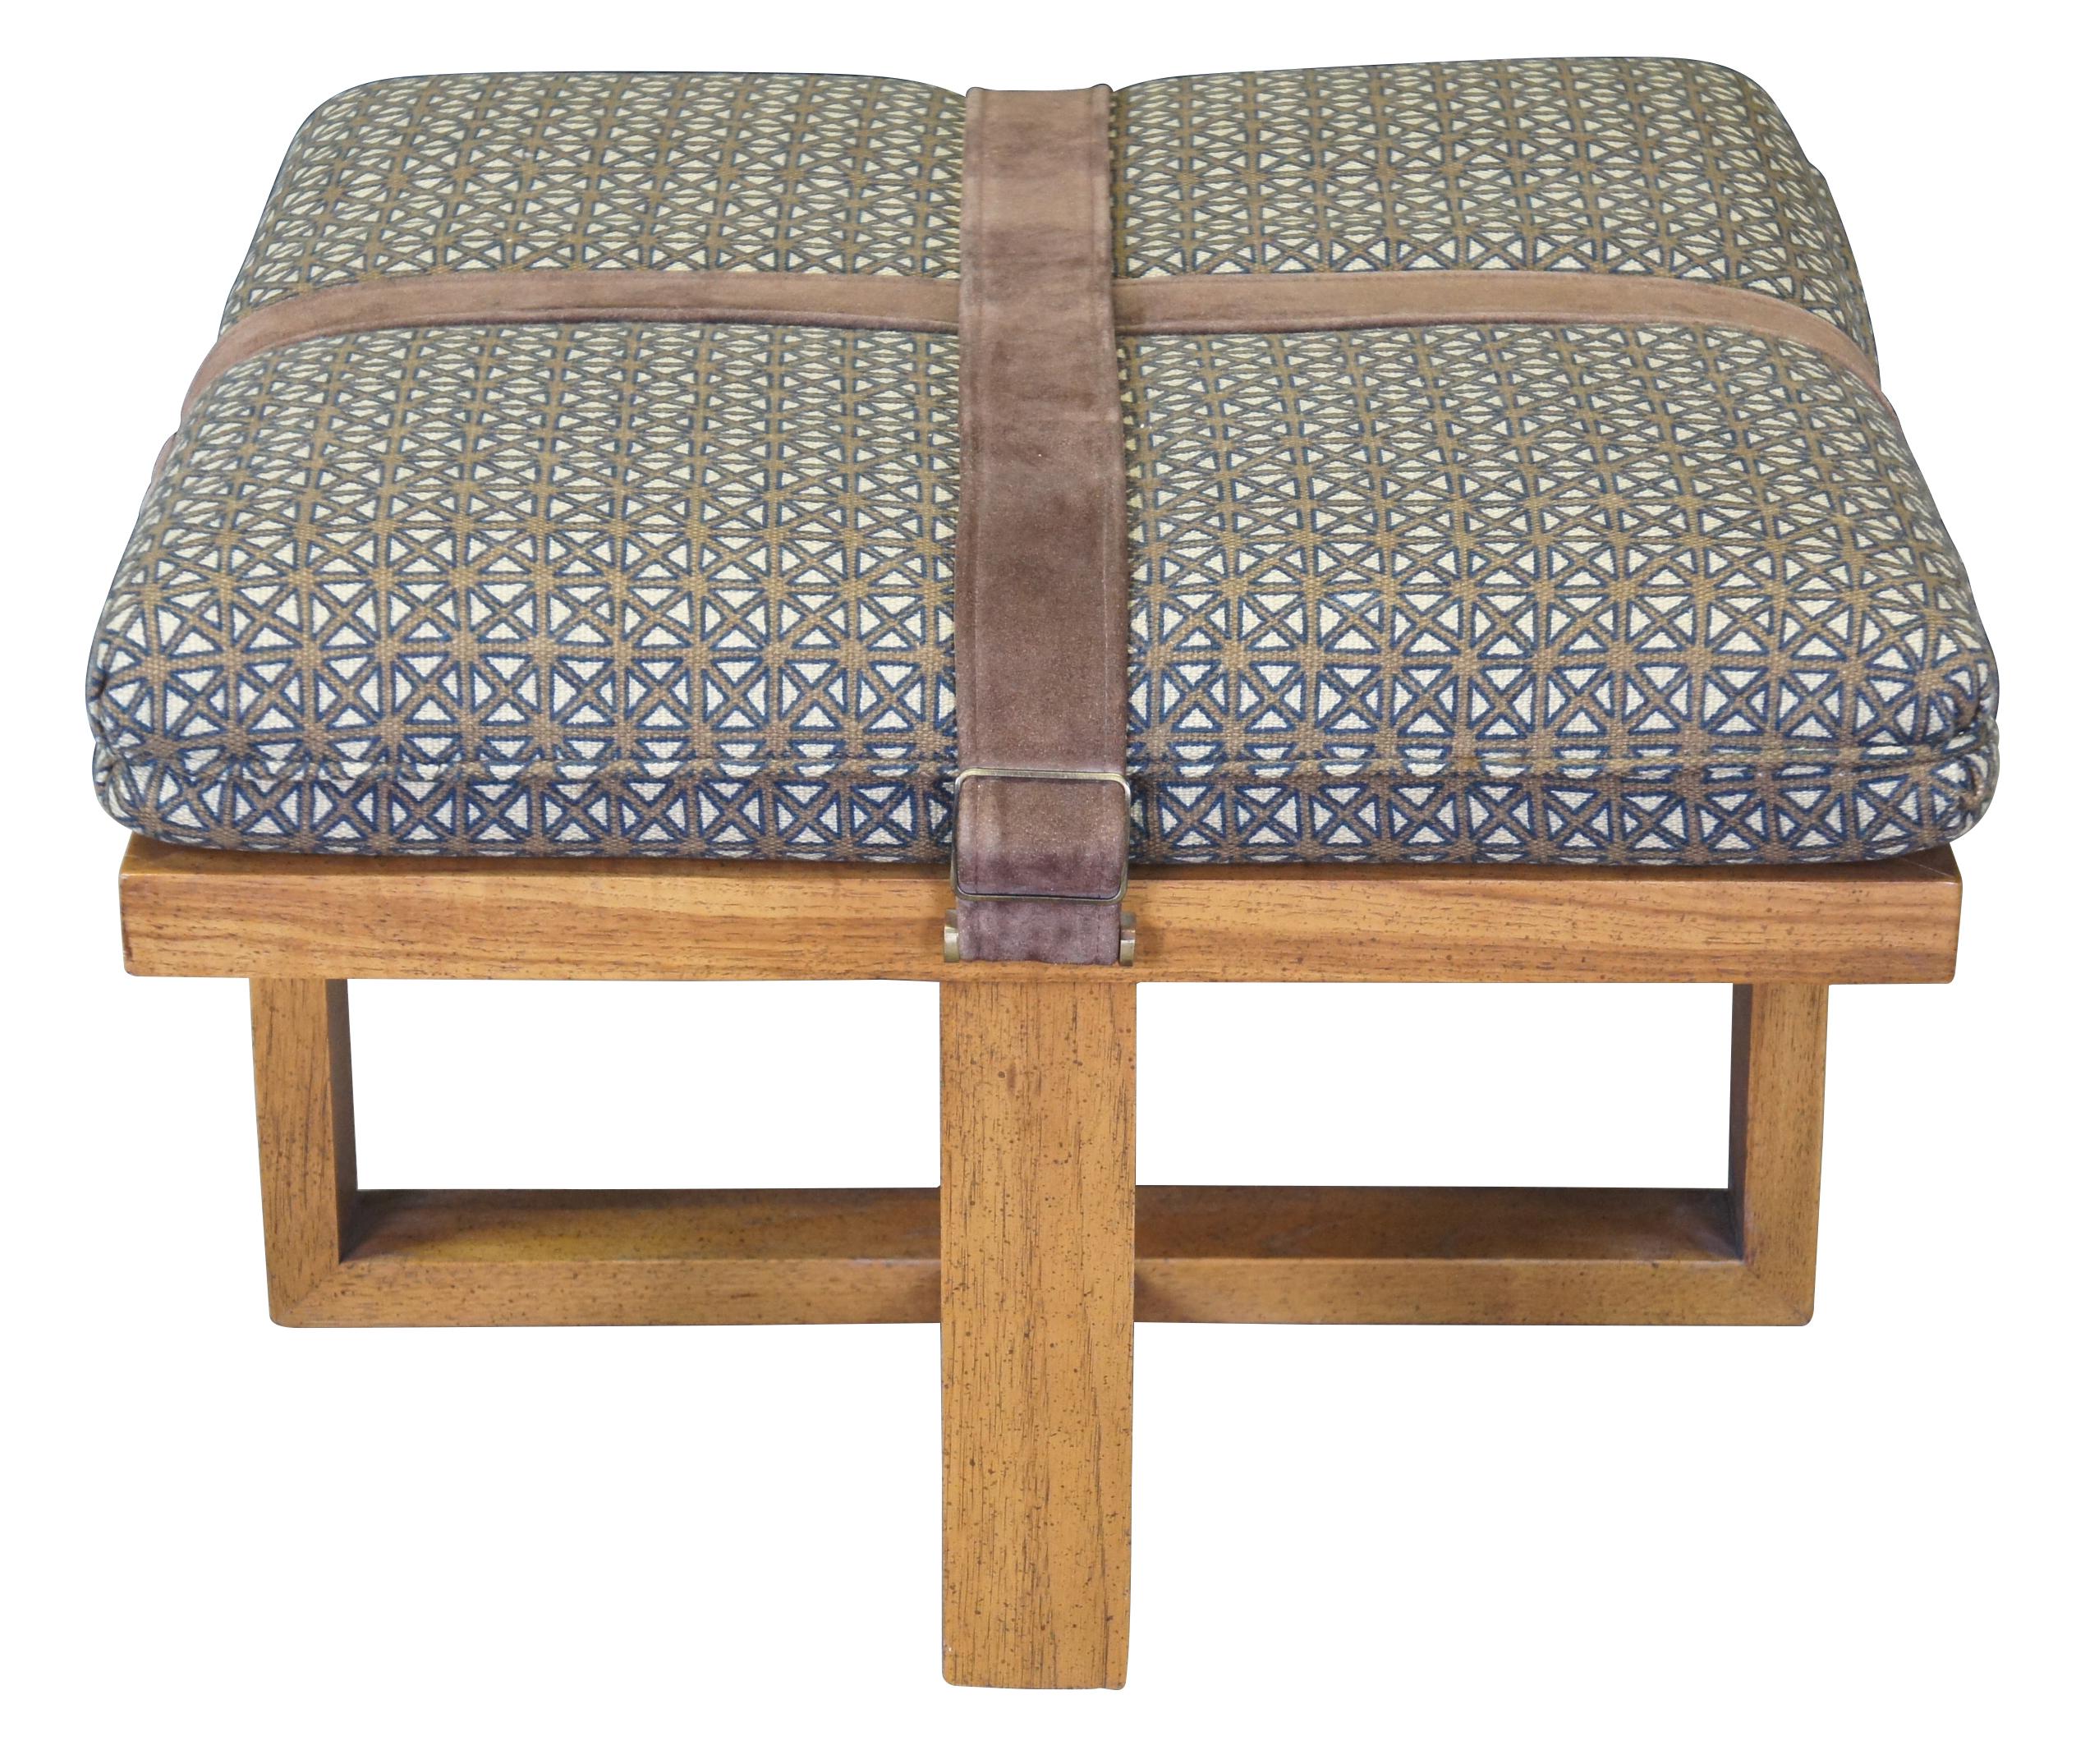 Late 20th C. Modern Oak Buckled Suede Strap Ottoman Square Foot Stool Bench MCM In Good Condition For Sale In Dayton, OH